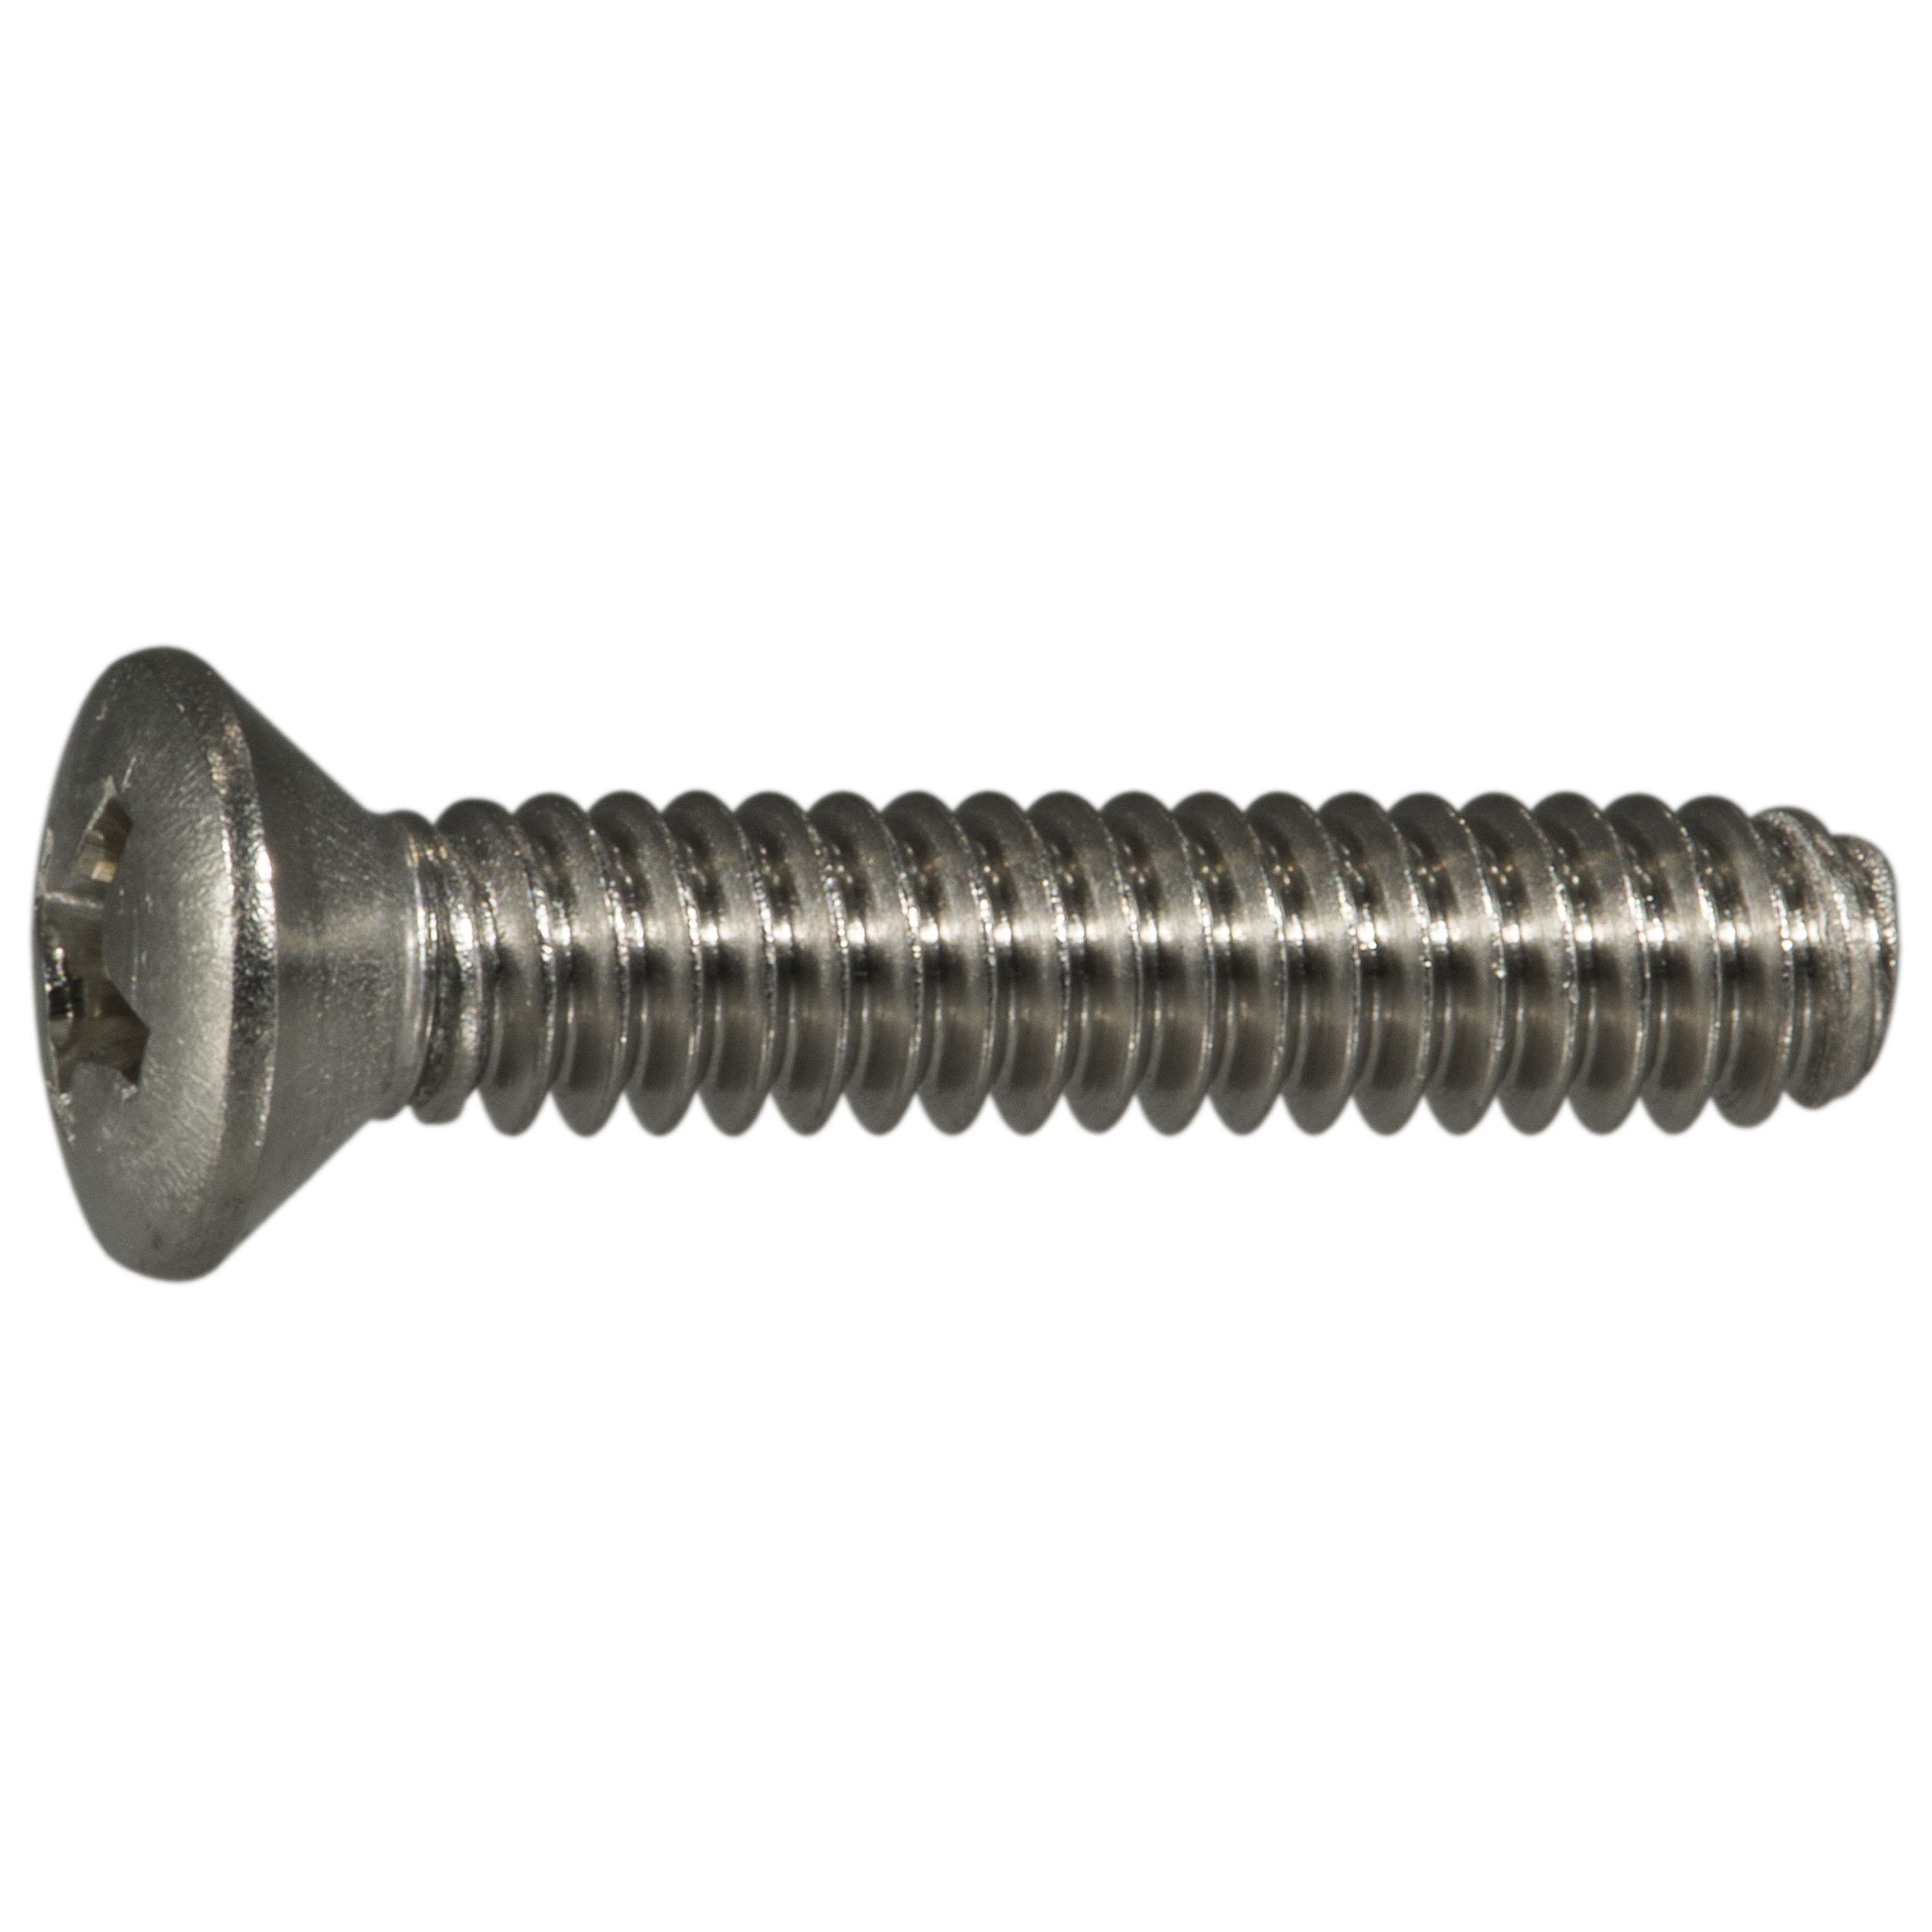 3/8-16 x 1" Phillips Oval Head Machine Screws Stainless Steel 18-8 Qty 10 